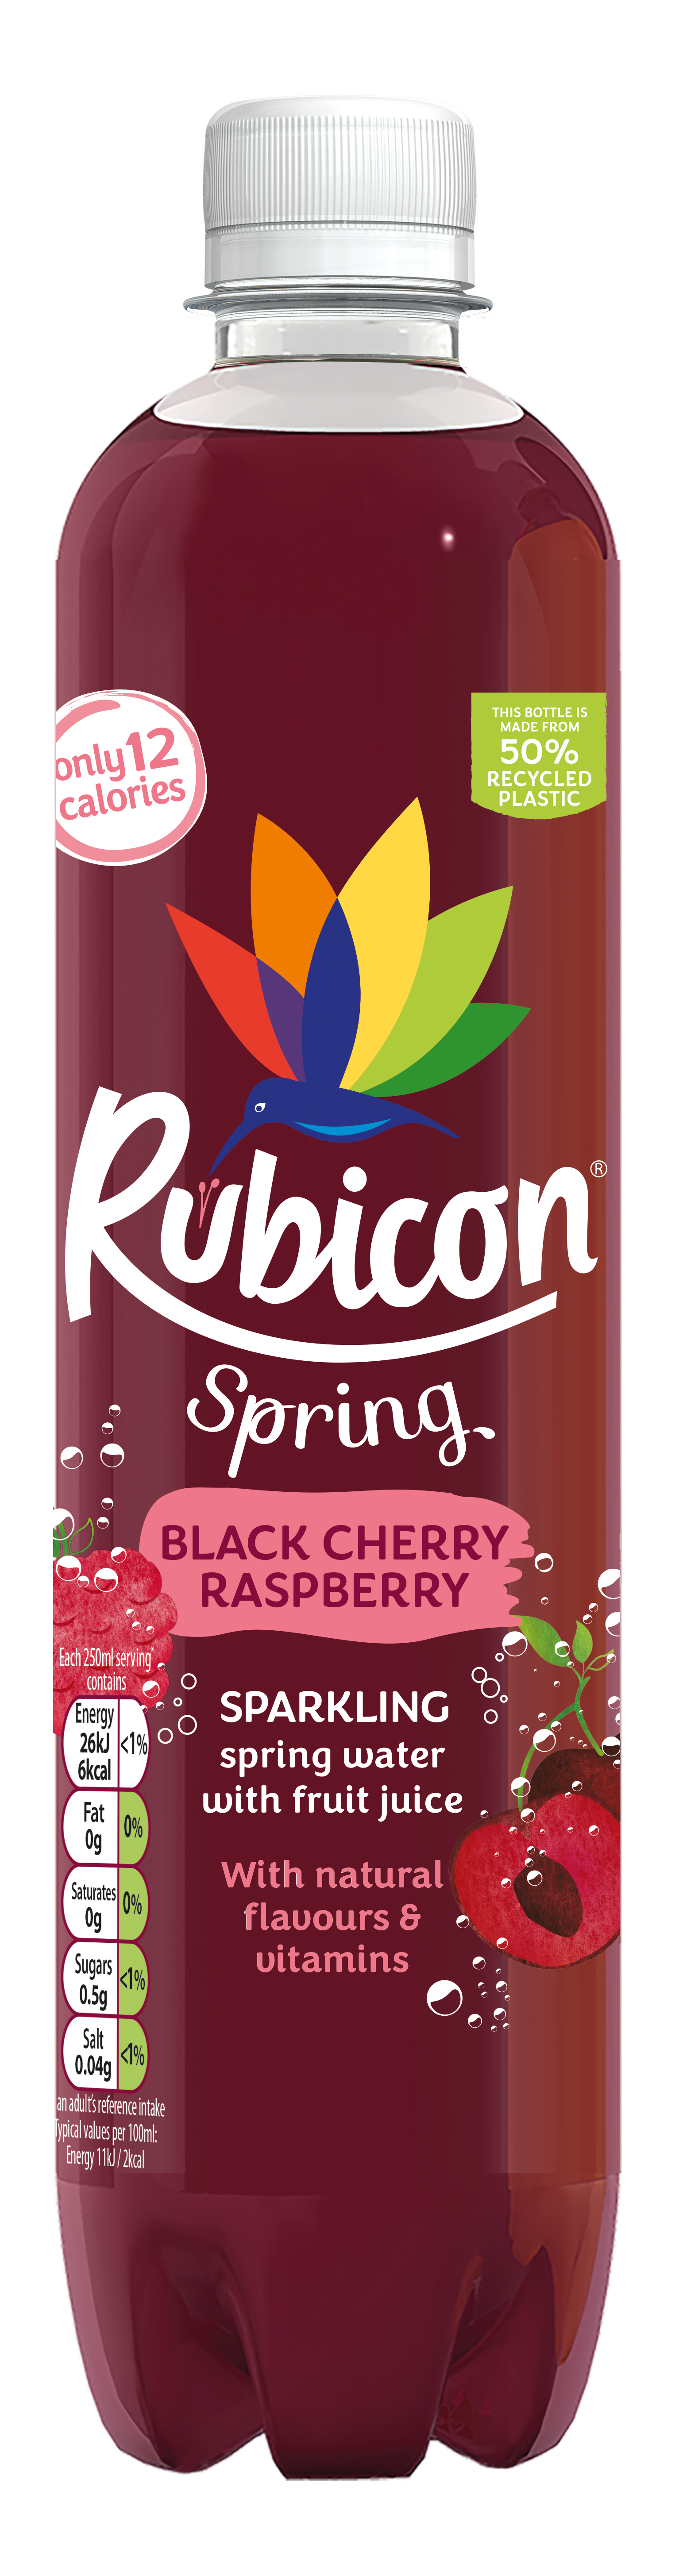 Rubicon boosts summer sales with 'bold' brand campaign